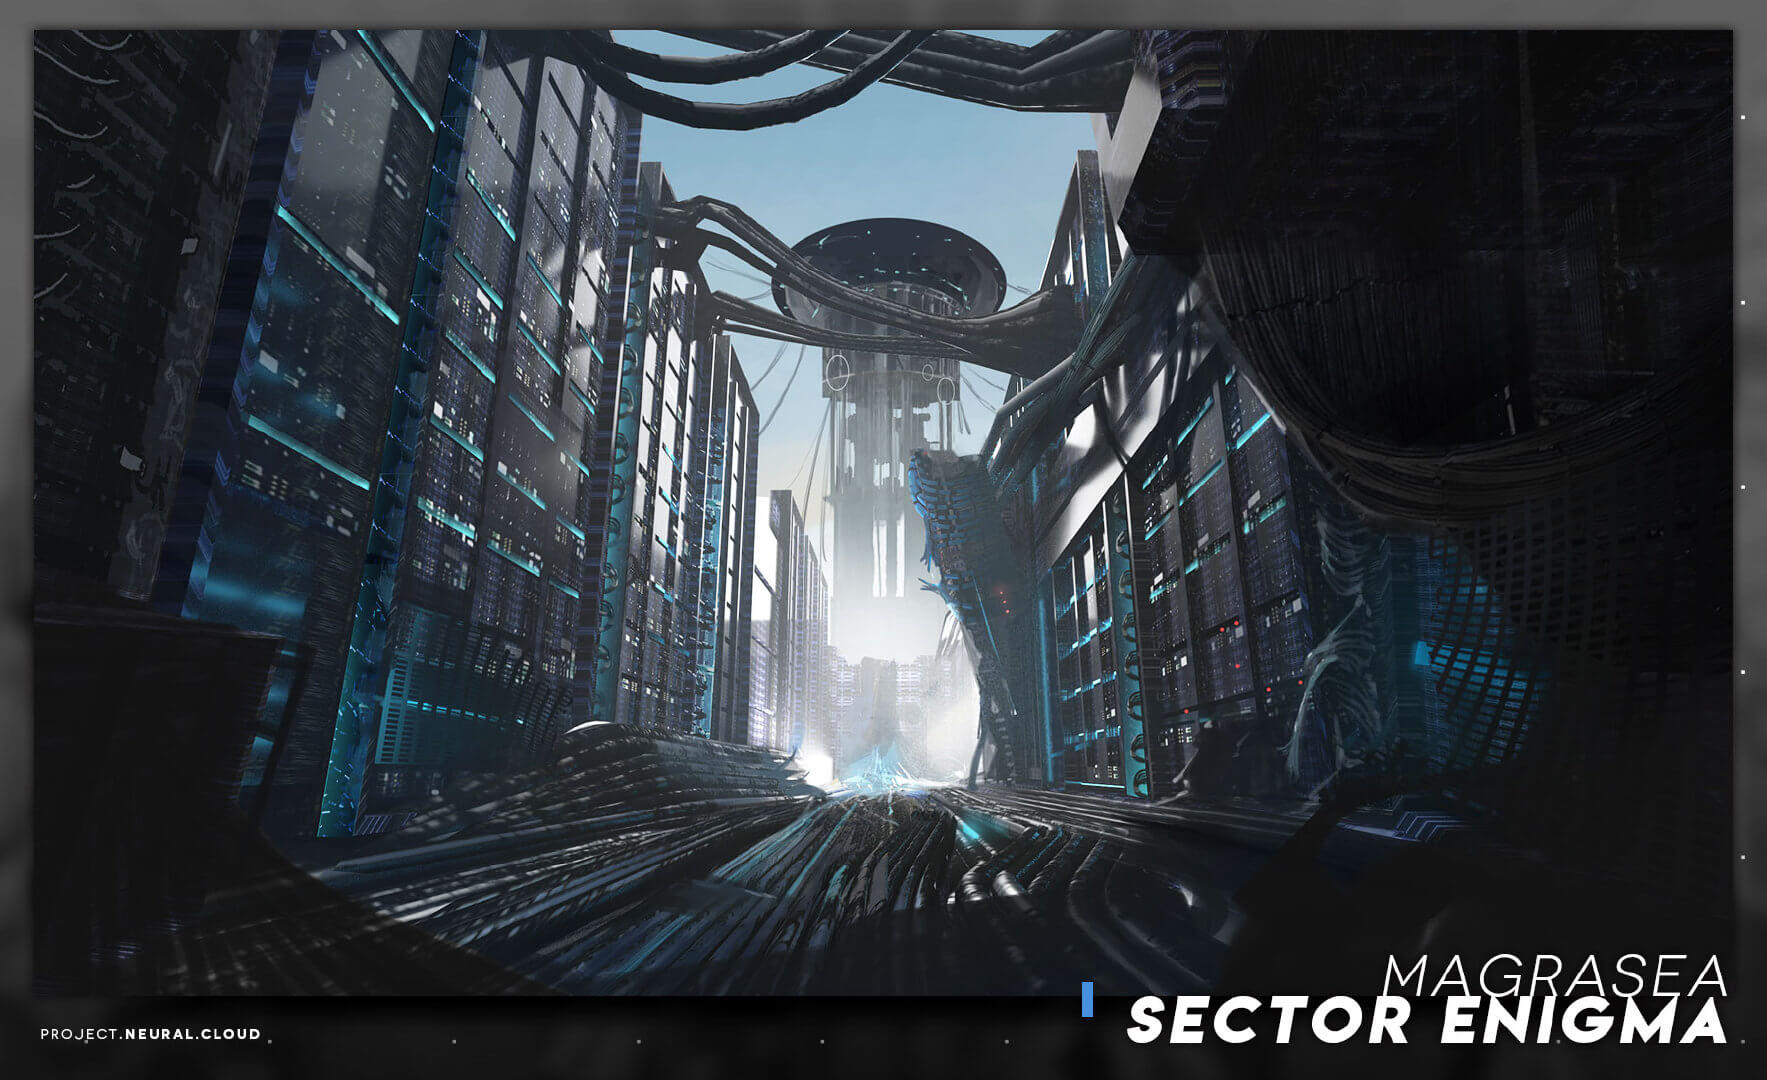 enigma sector